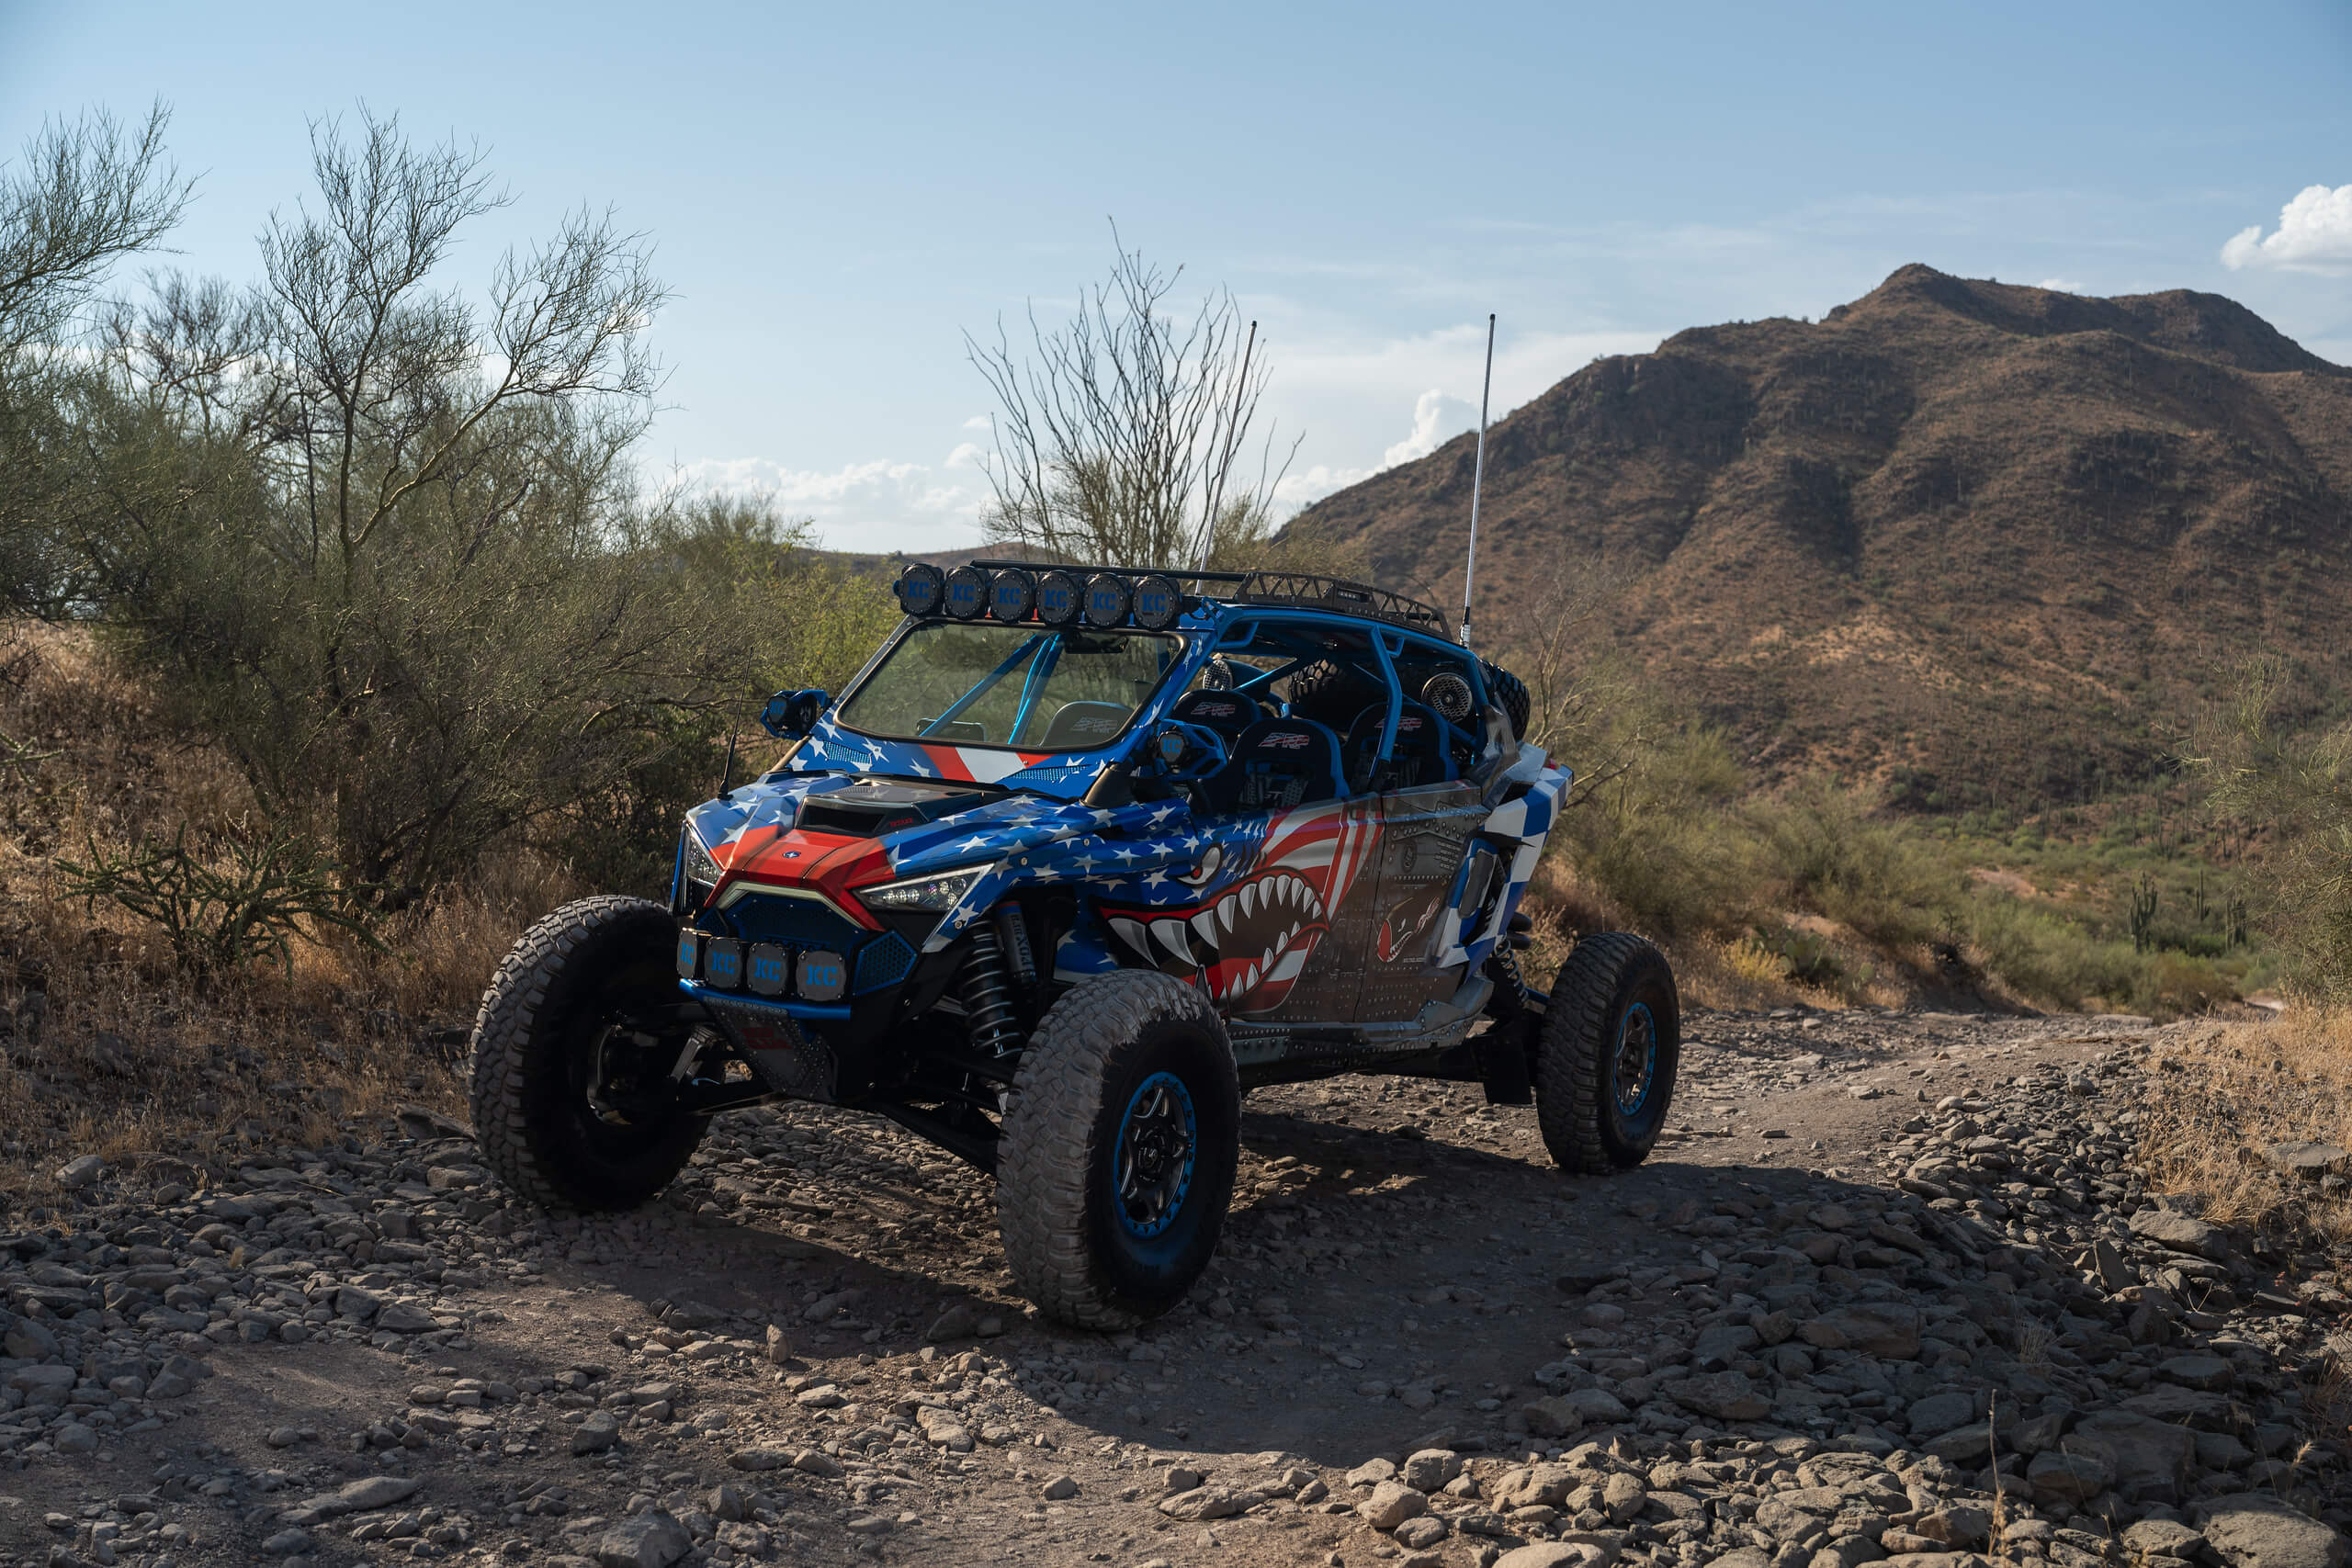 Mike Ericksons Polaris RZR Pro R Custom Build By Jagged X Offroad 16